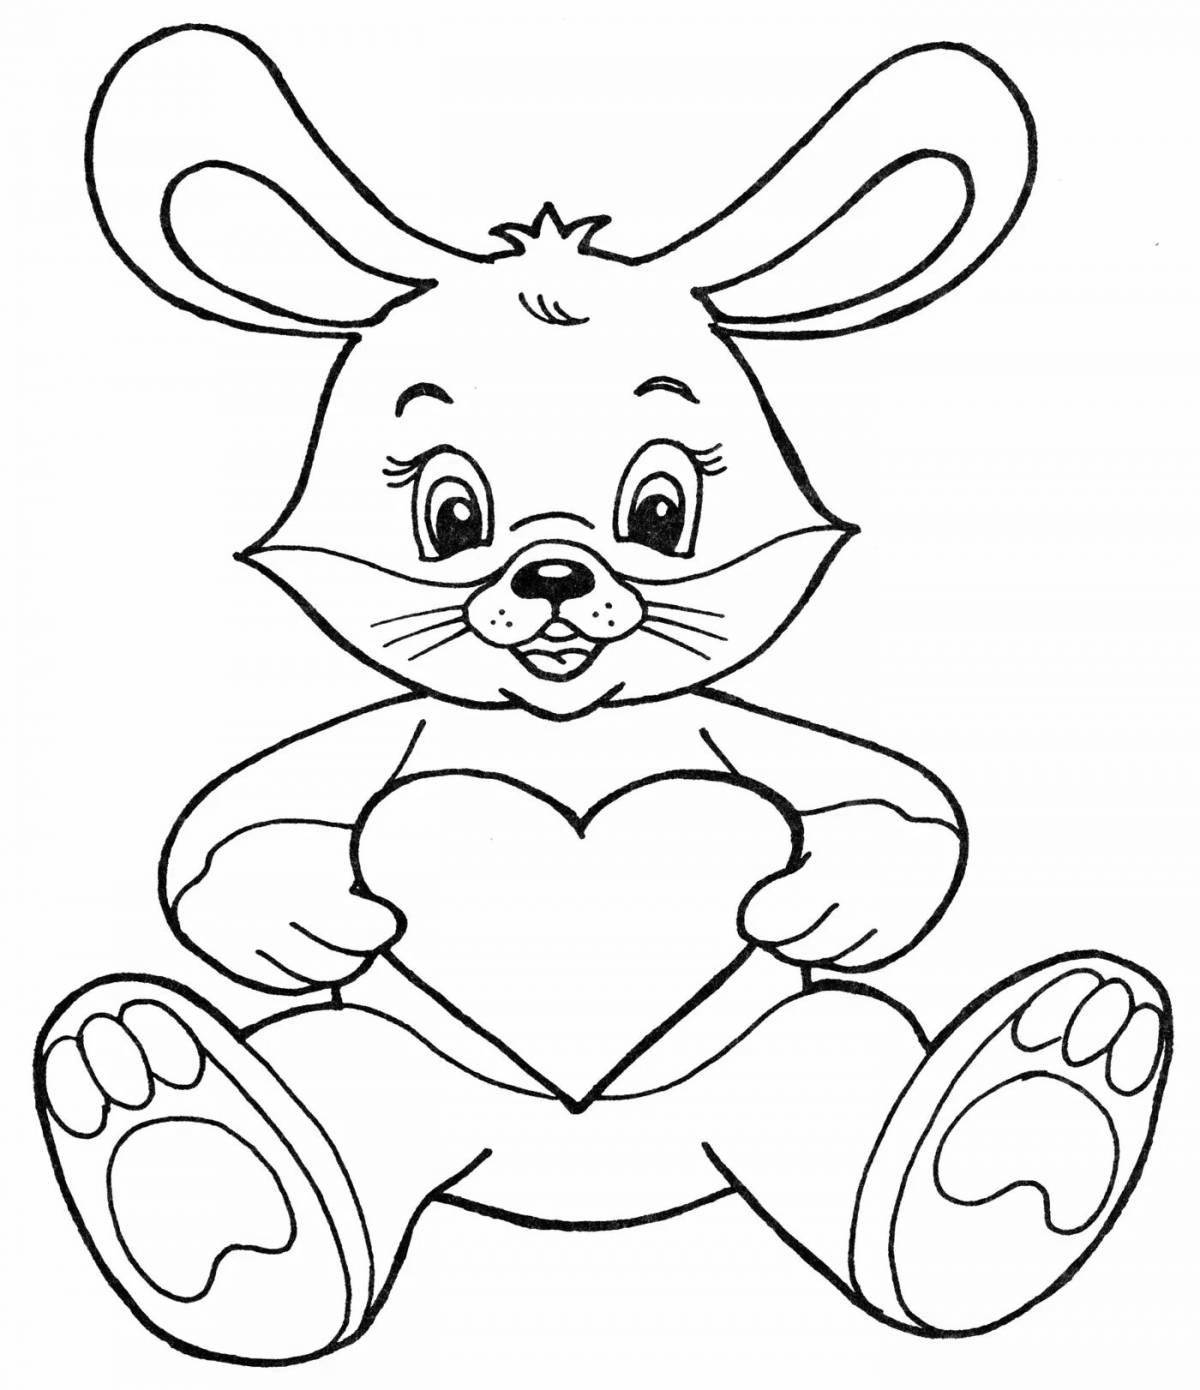 Coloring book cheerful rabbit with a heart